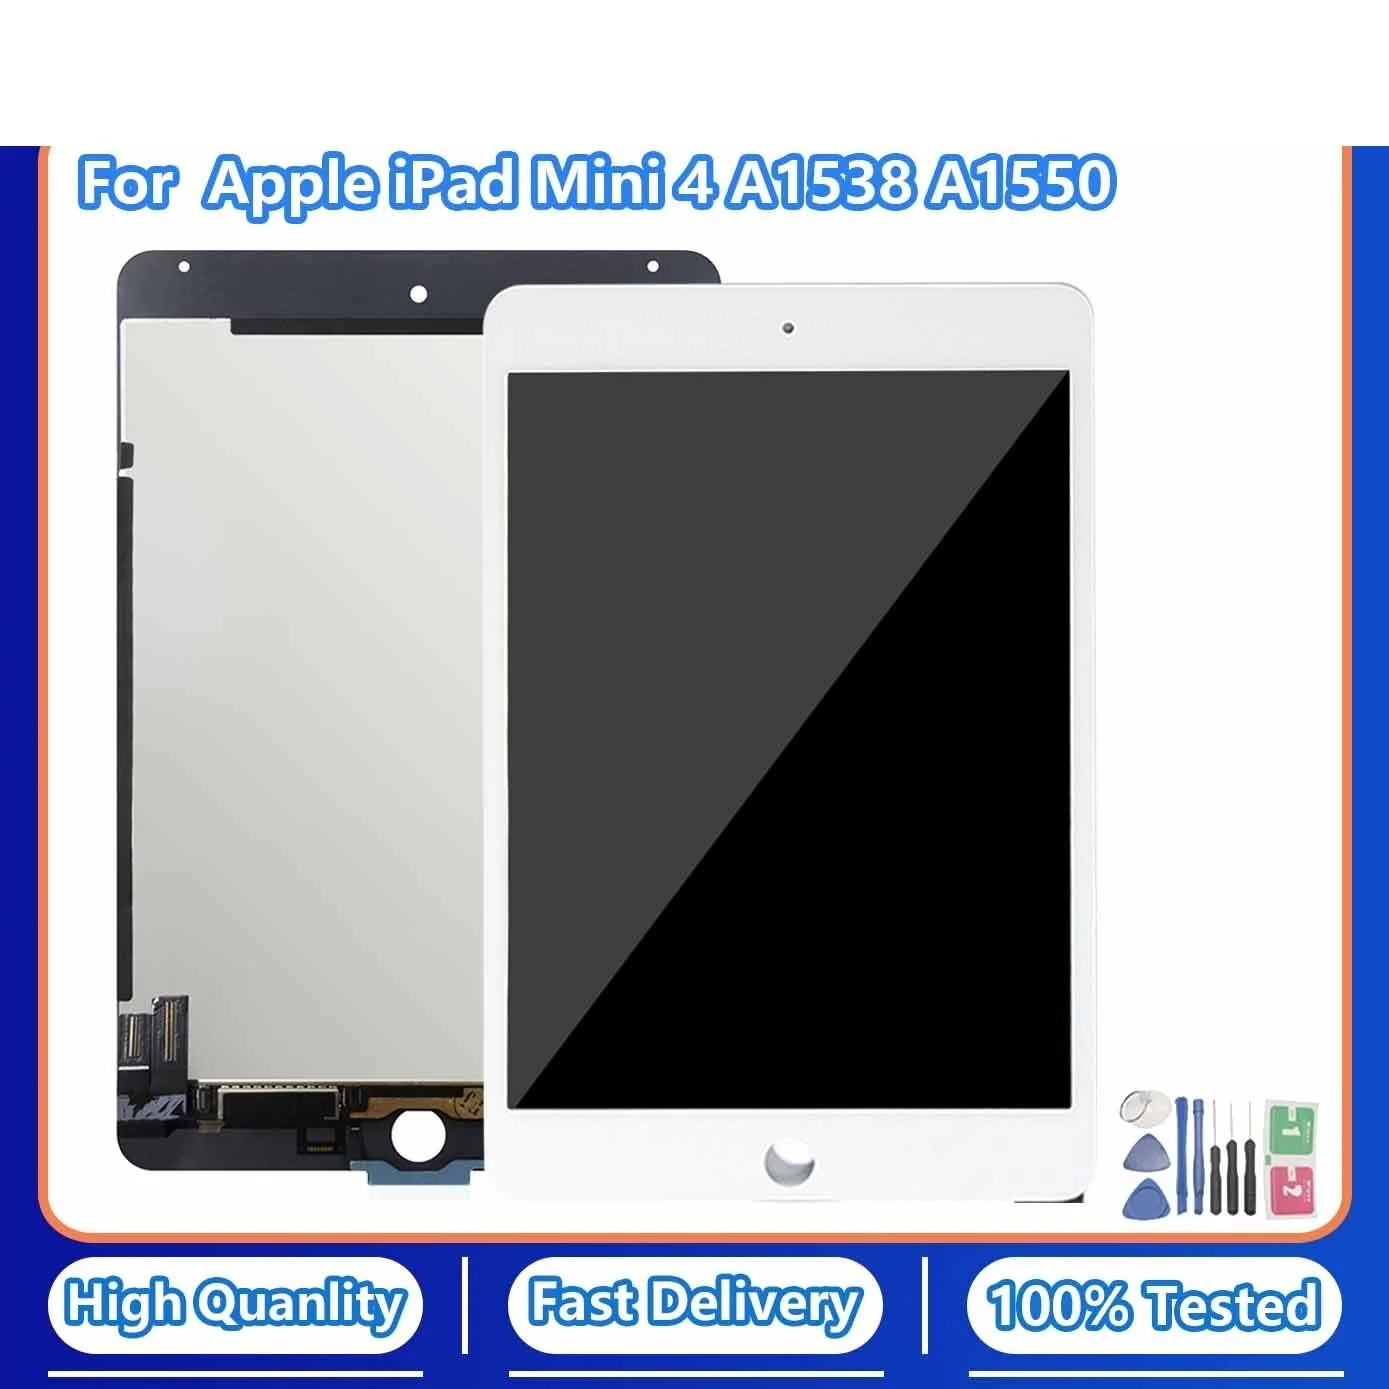 

New LCD Grade AAA+ For iPad mini 4 Mini4 A1538 A1550 LCD Display Touch Screen Digitizer Panel Assembly Replacement Part High